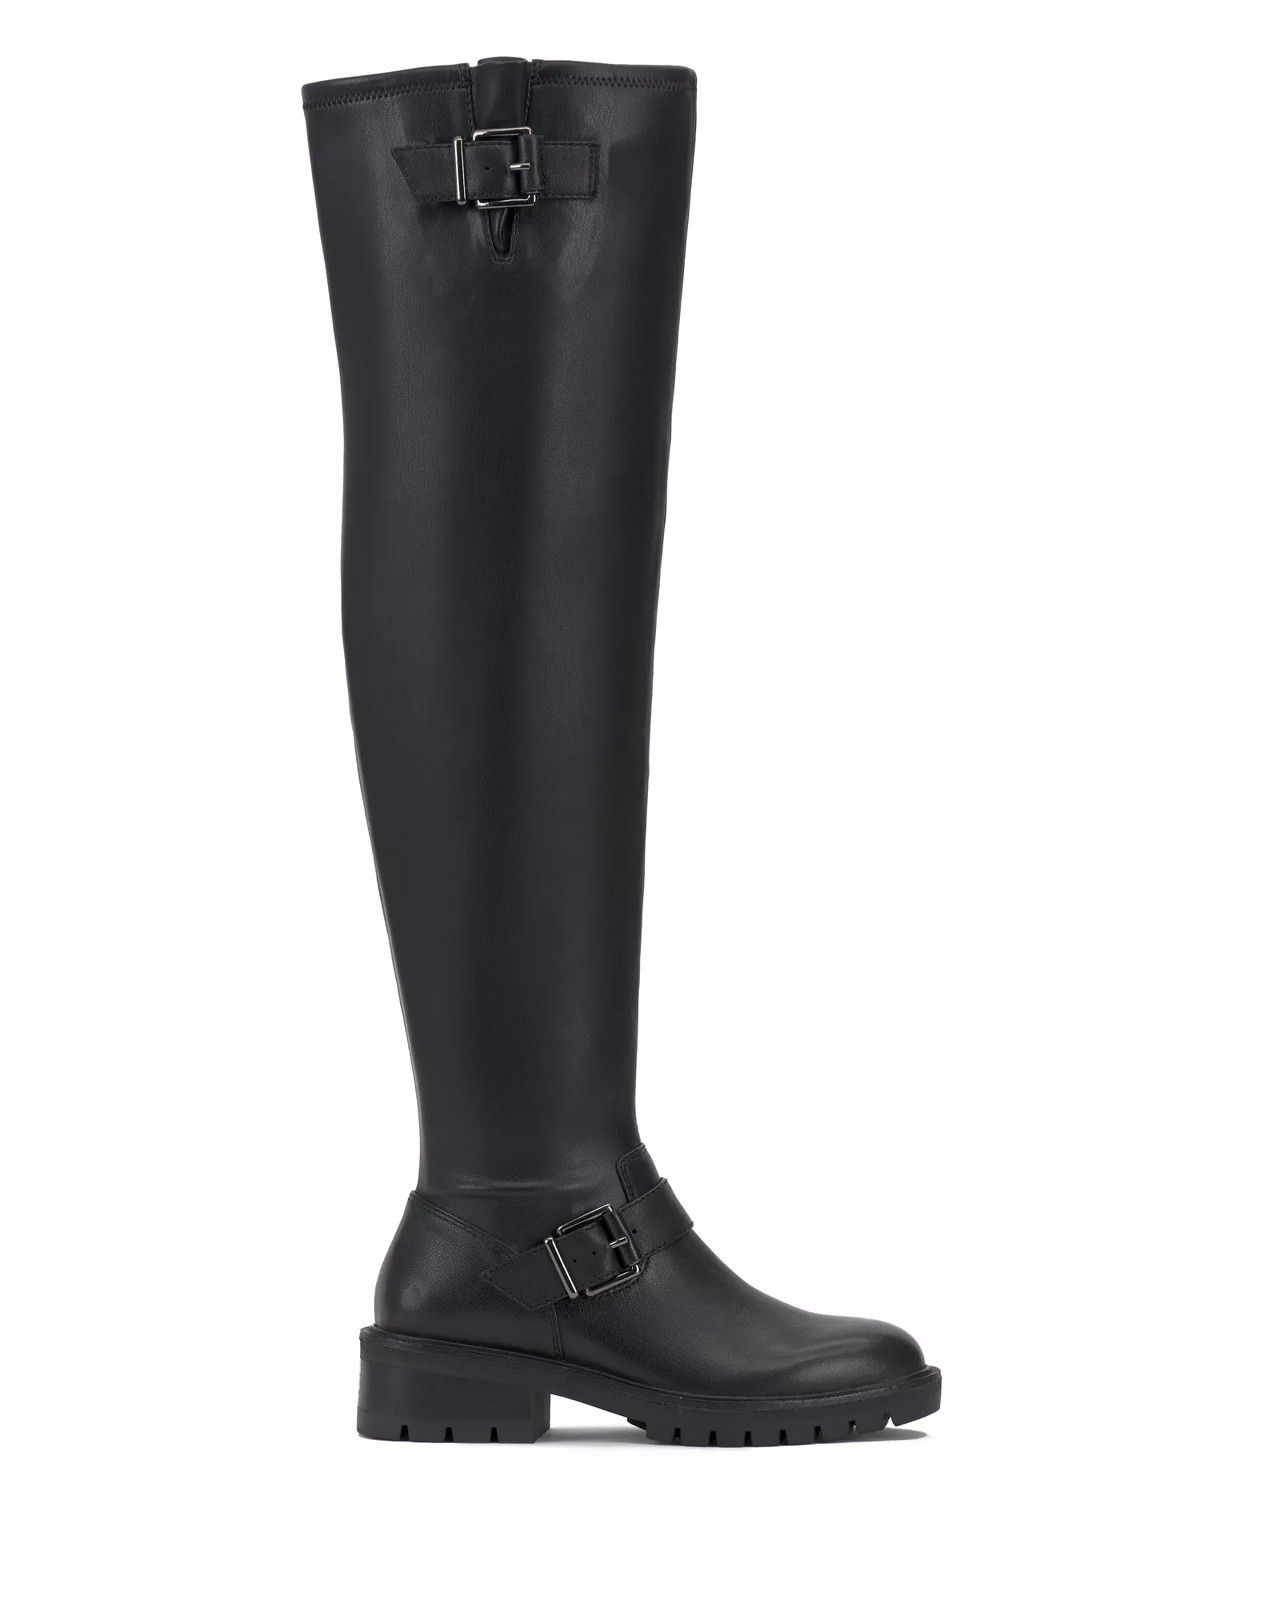 Vince Camuto Abrila Over-the-Knee Boot | Vince Camuto